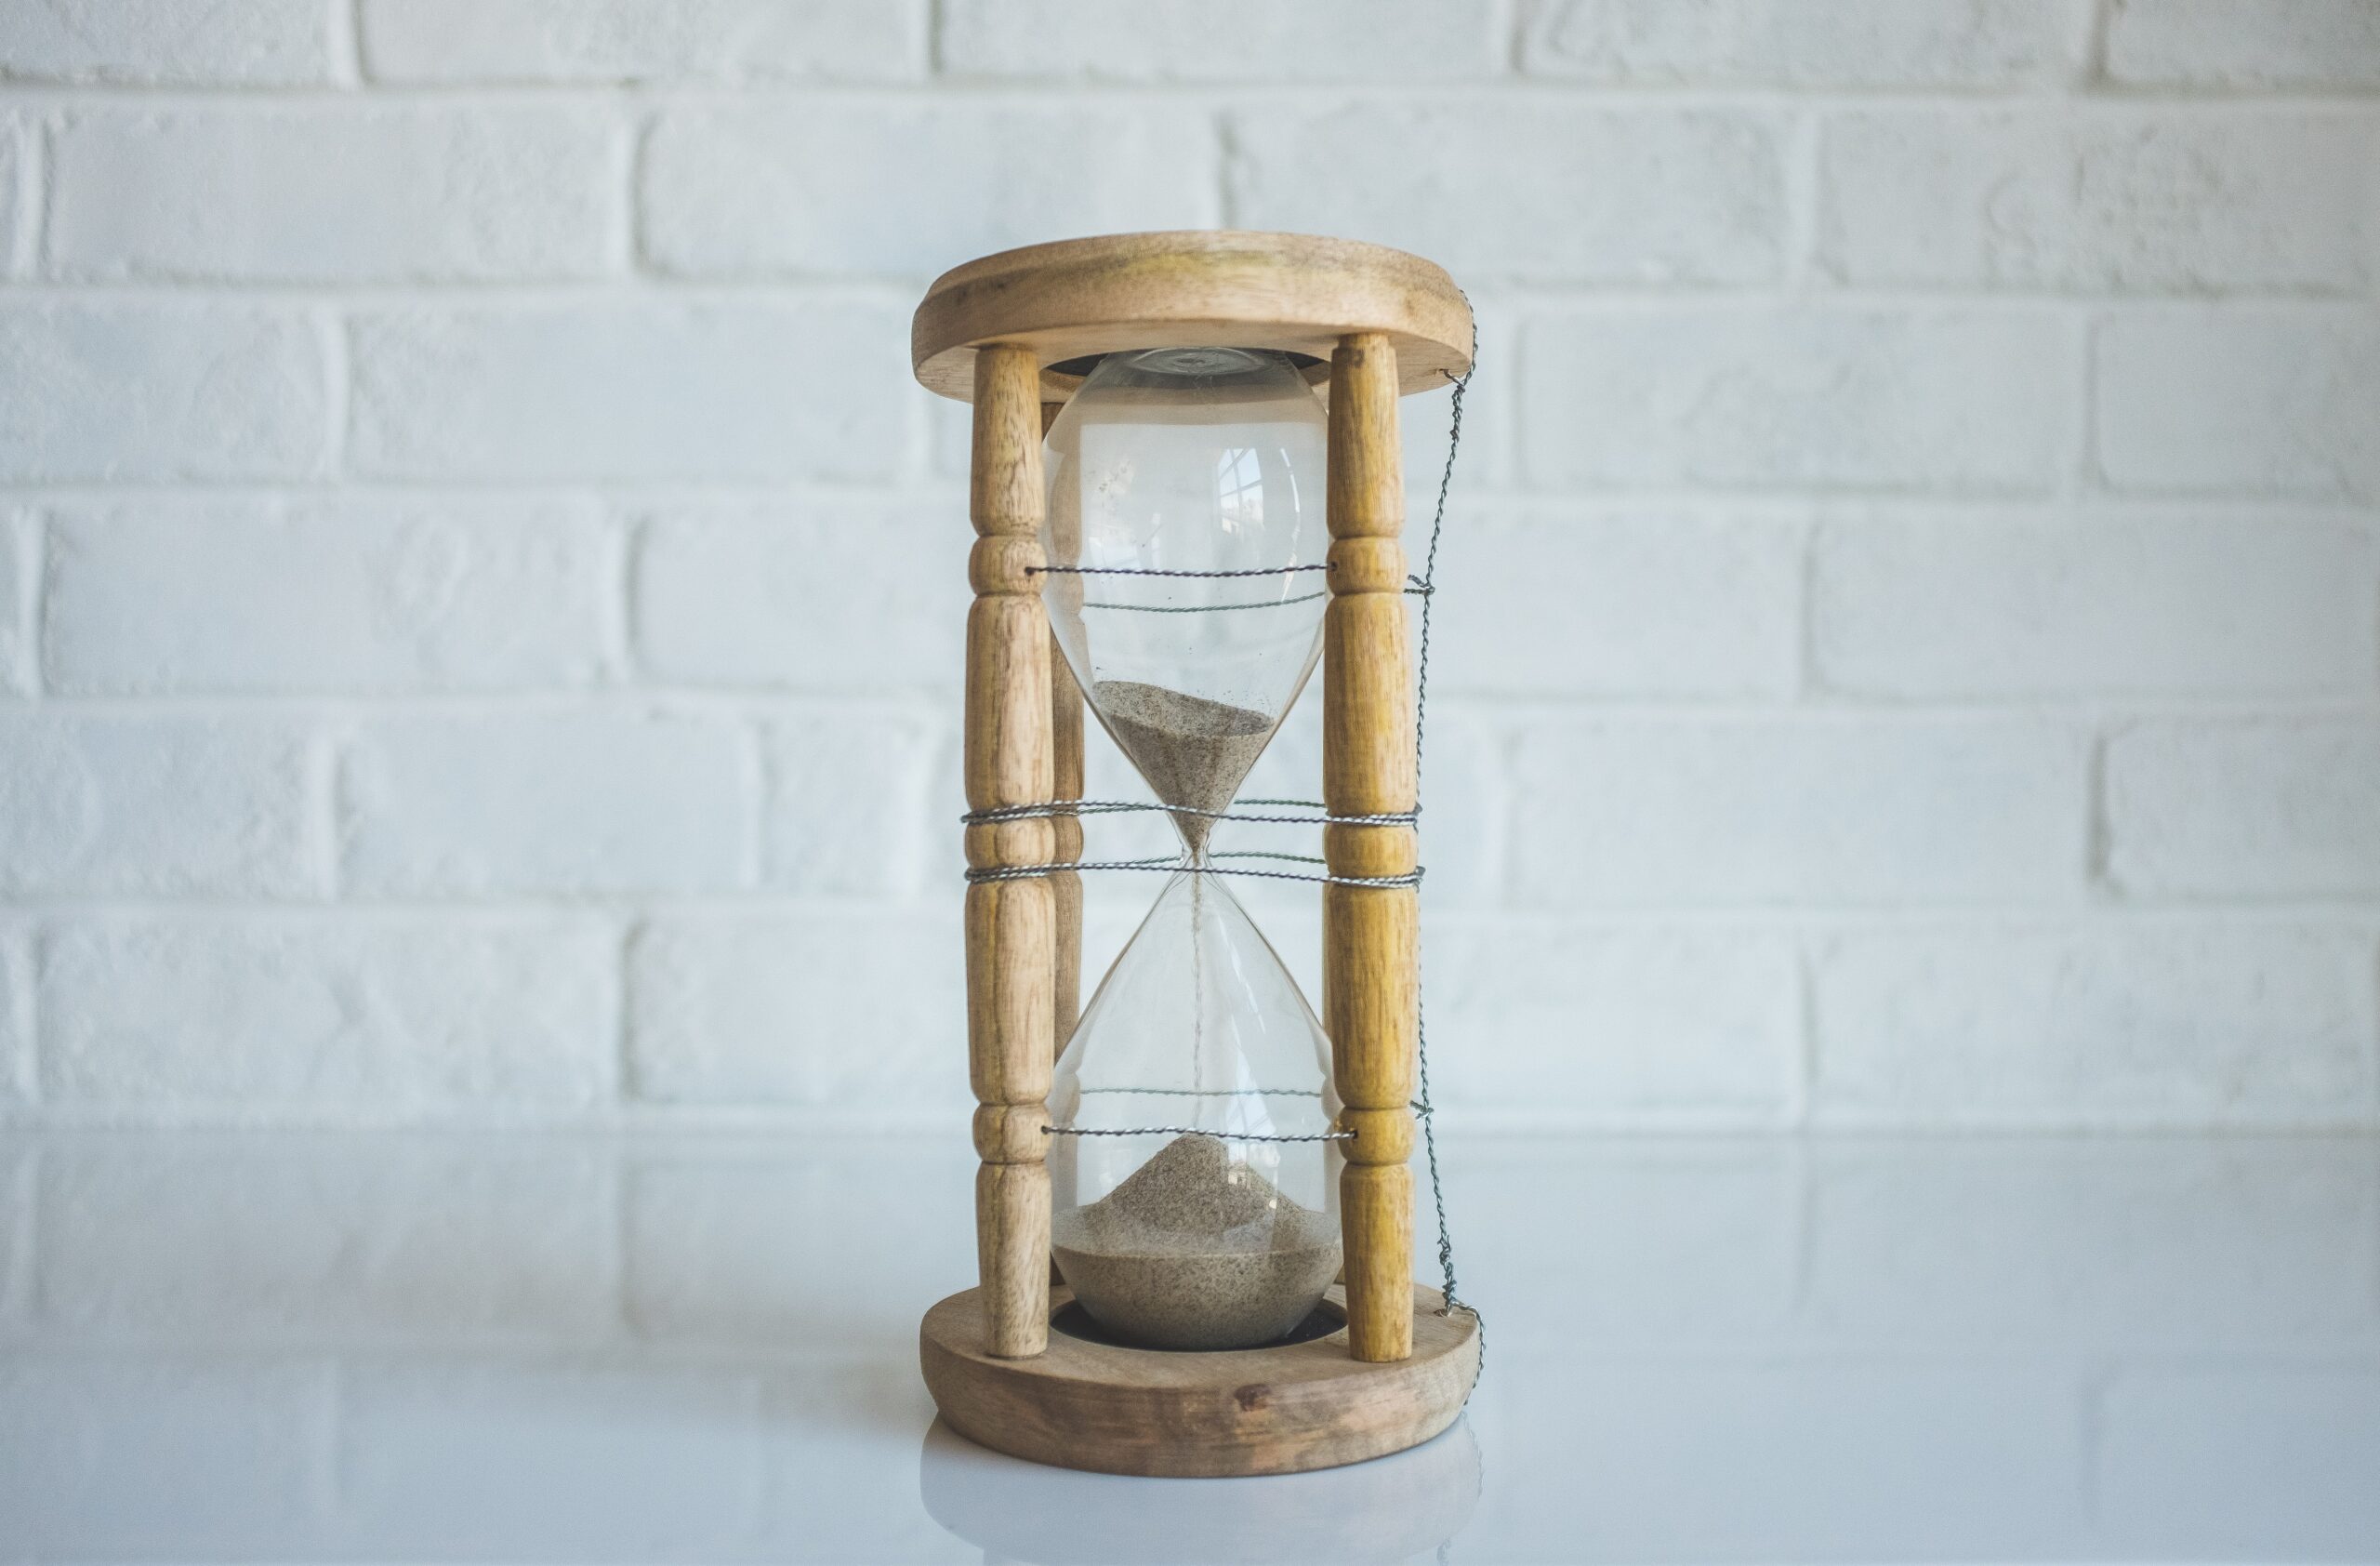 How Much Time Does It Take To Learn Social Media Marketing?